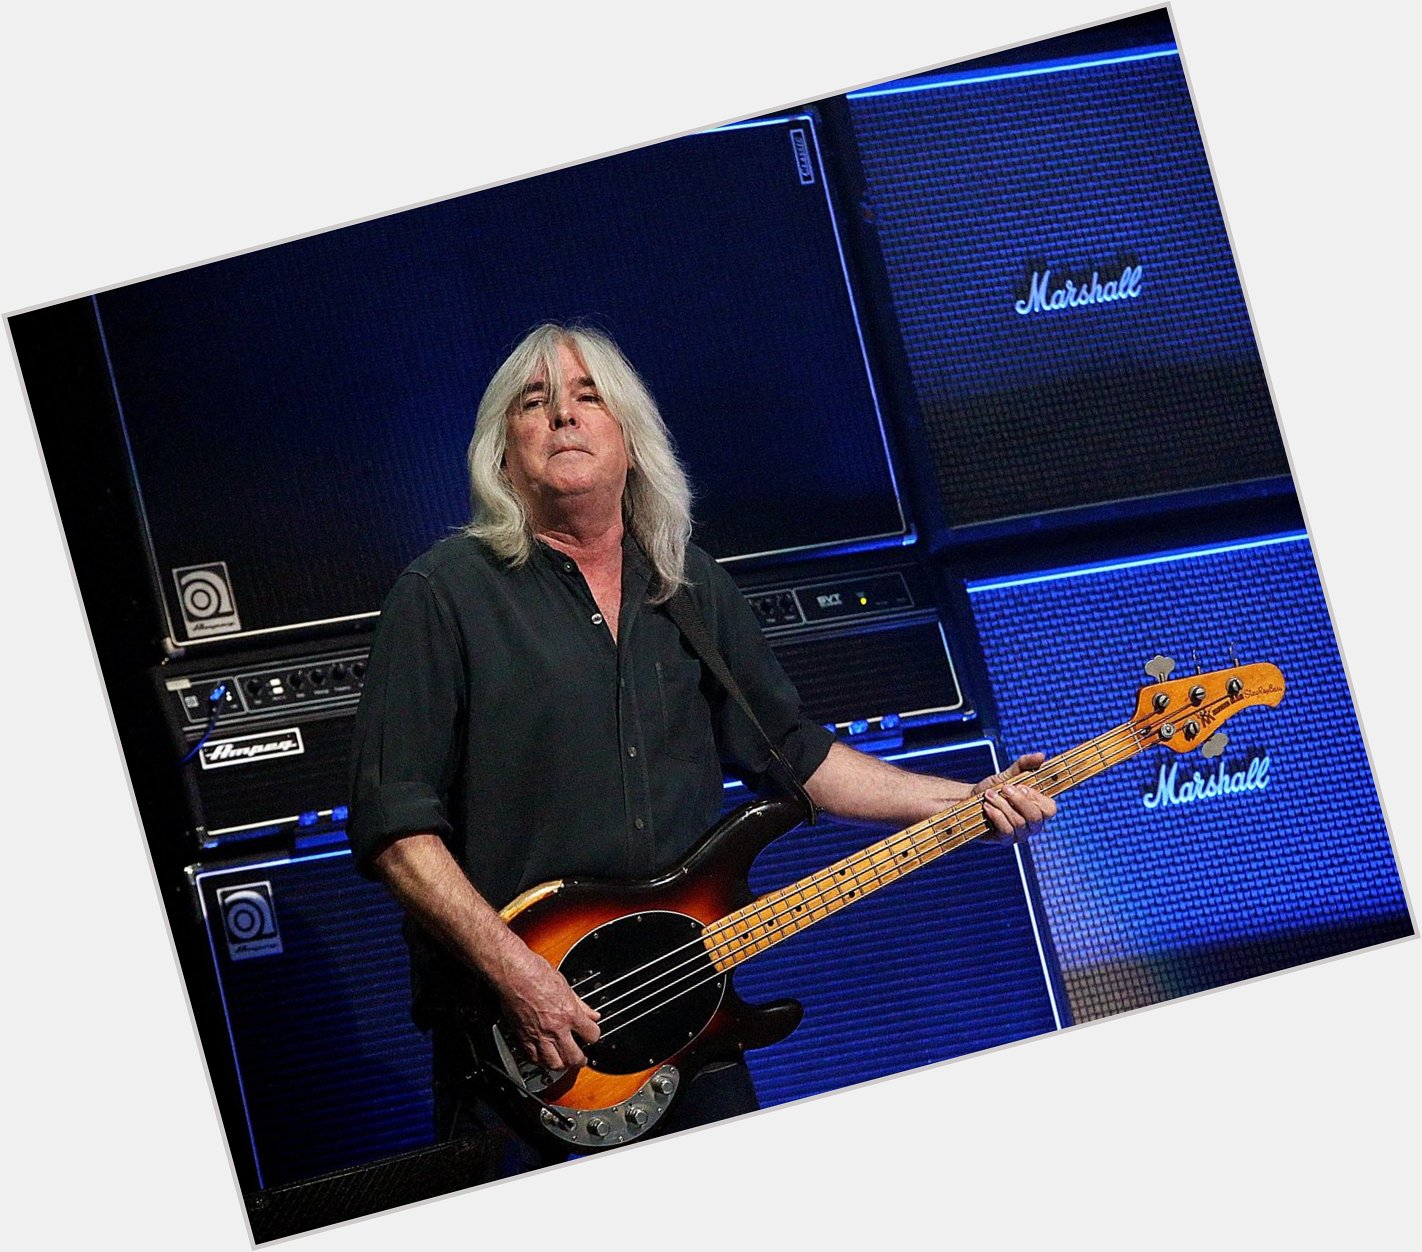 Happy Birthday Cliff Williams bassist of the Rock band AC  DC       